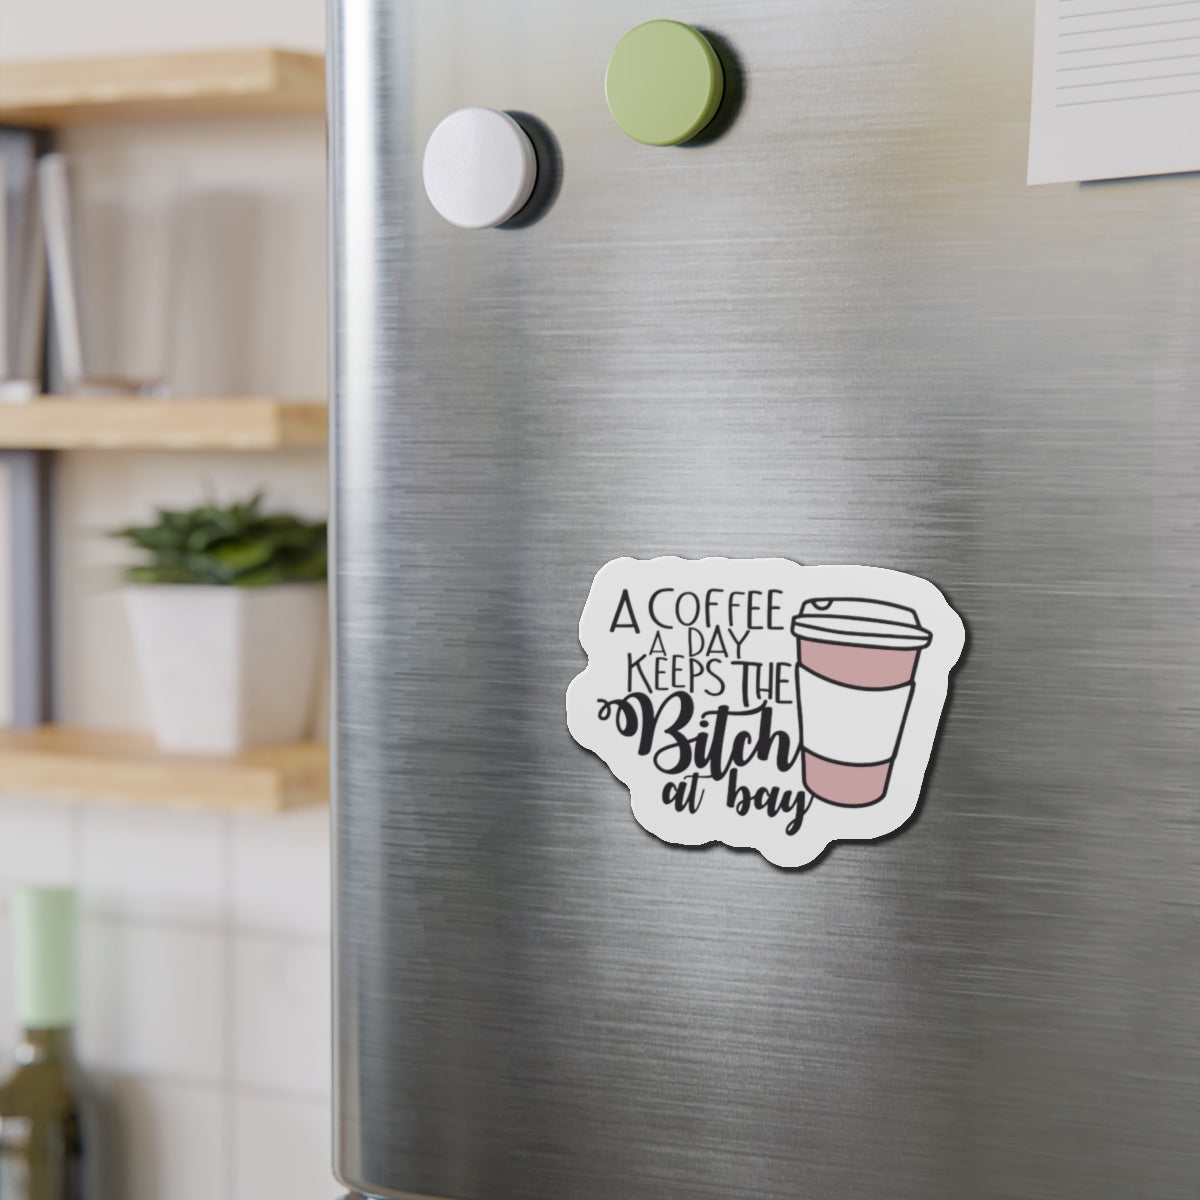 A Coffee a Day Keeps the B!tch at Bay Die-Cut Magnets